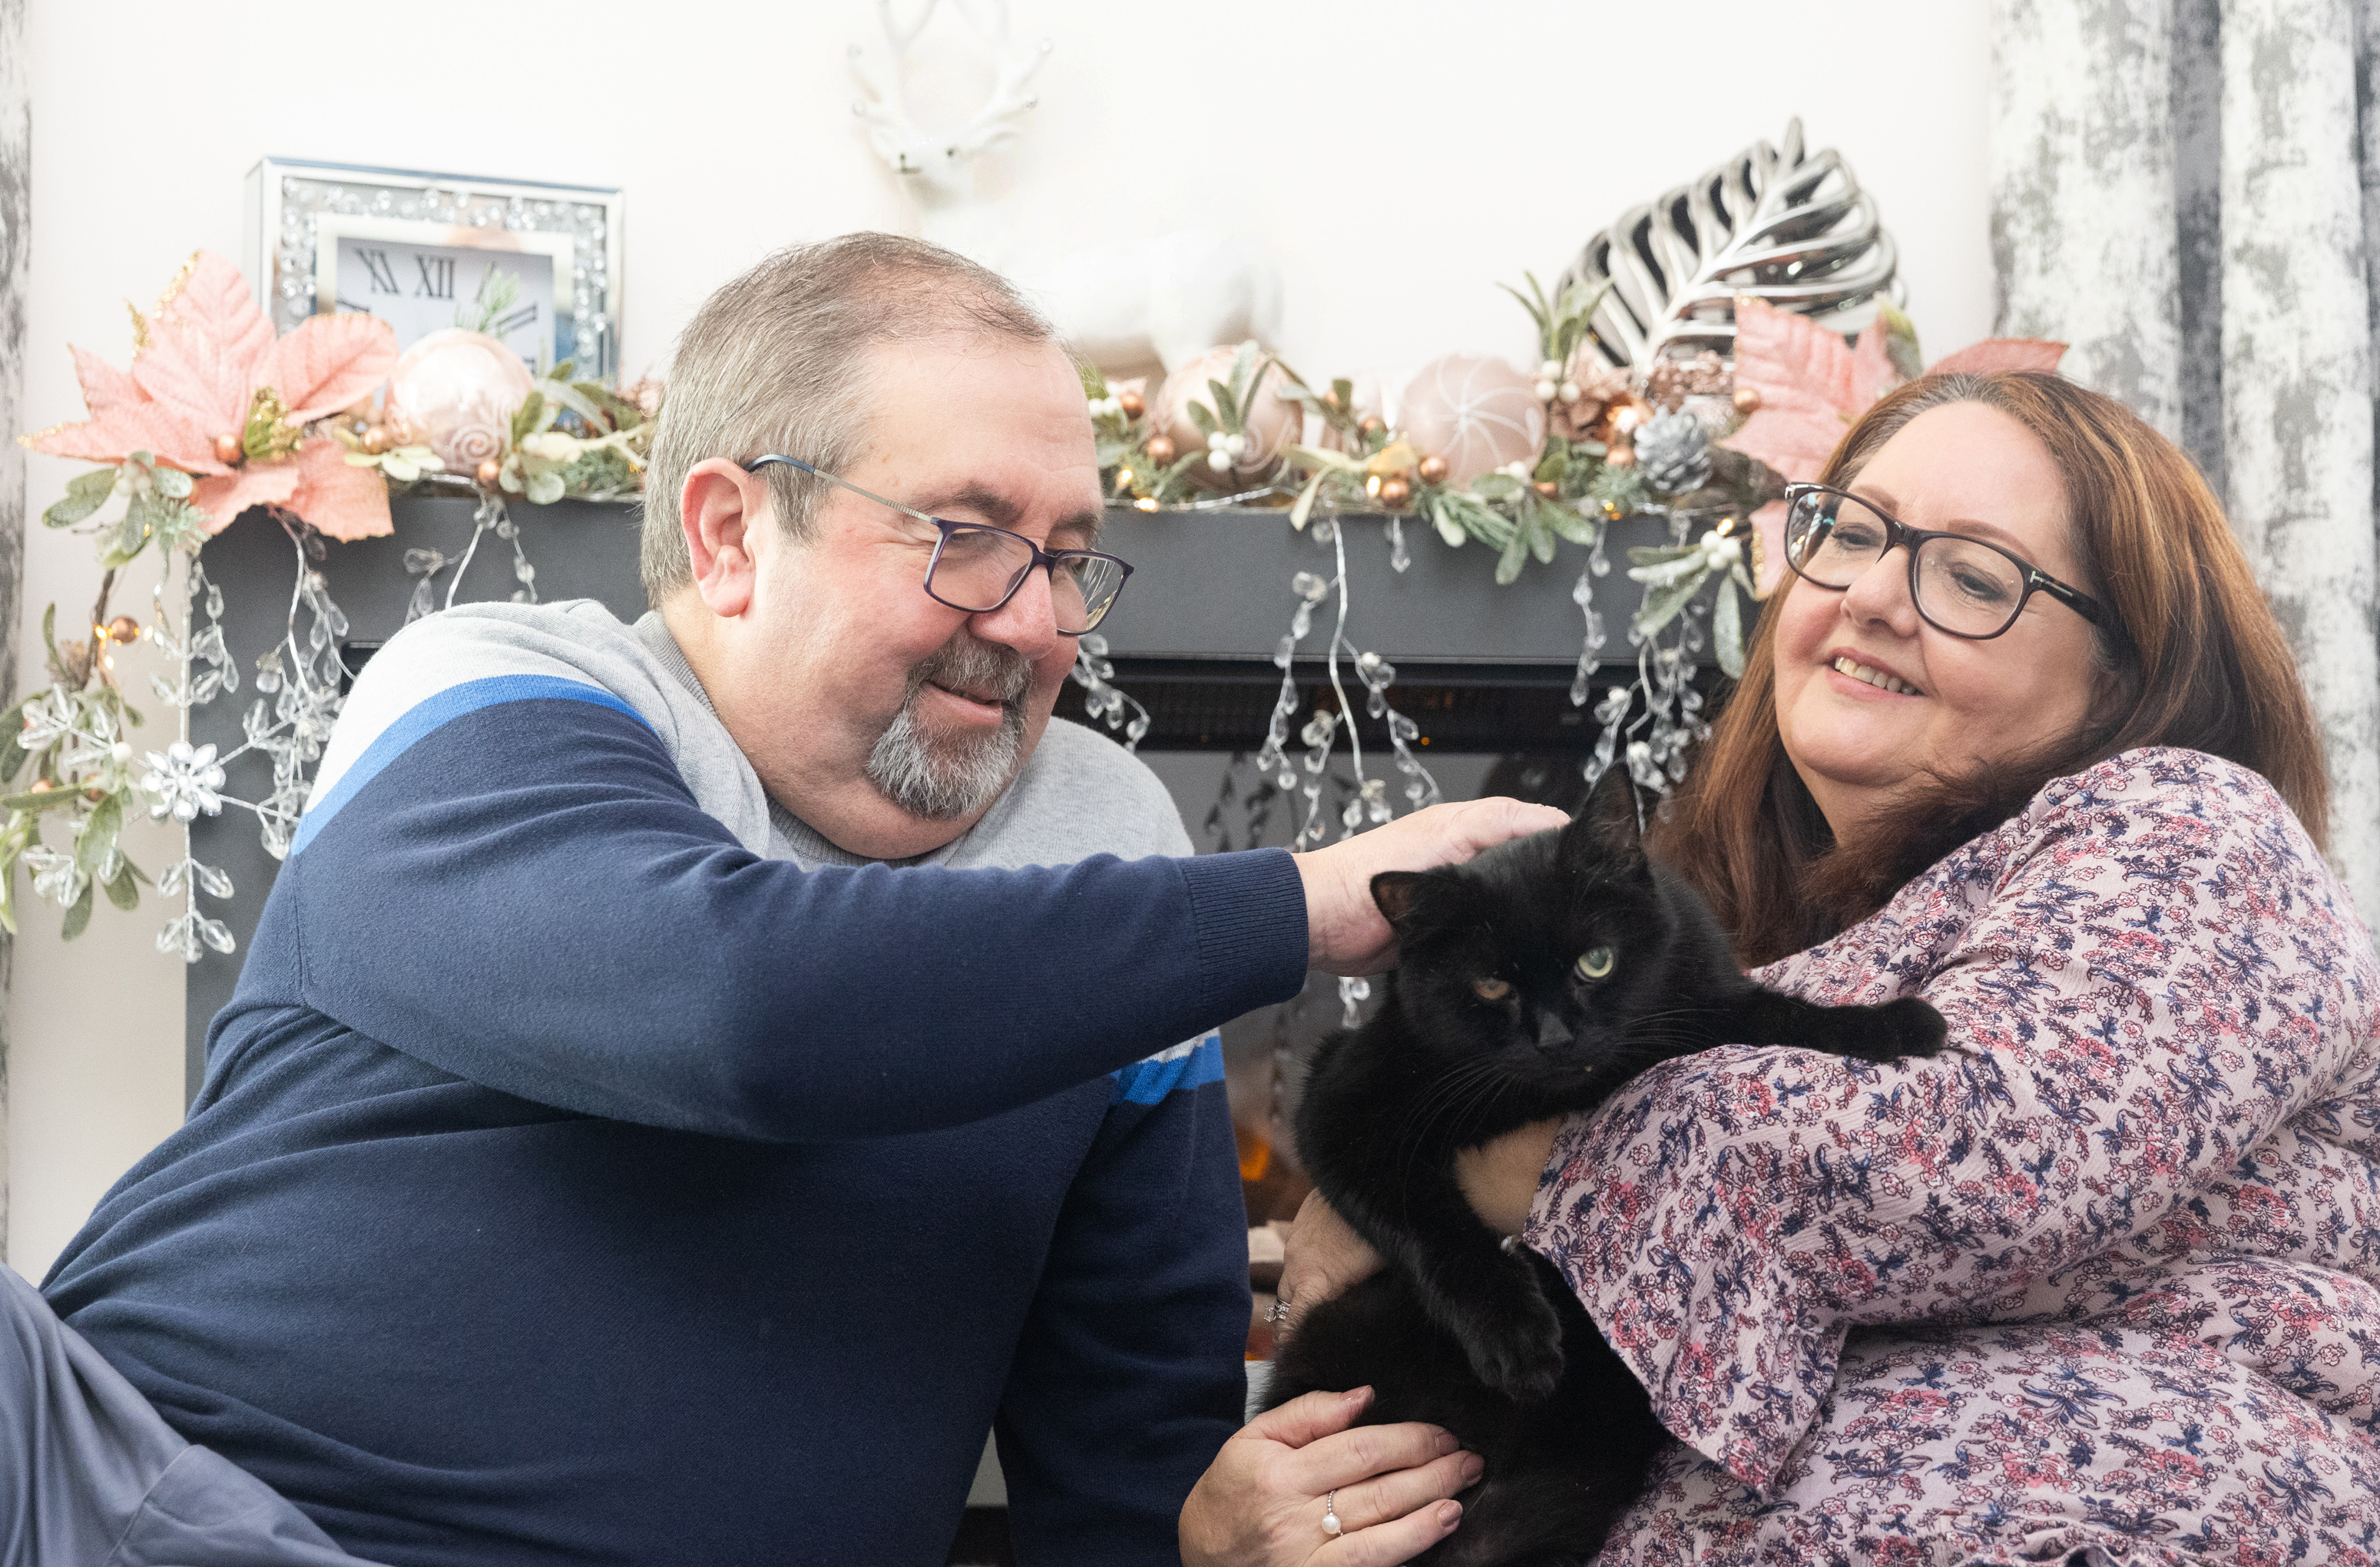 Lottery winners Tony Pearce, 71, and his 63-year-old wife Deb Pearce spare no expense looking after their cat Billy. (National Lottery/ PA)